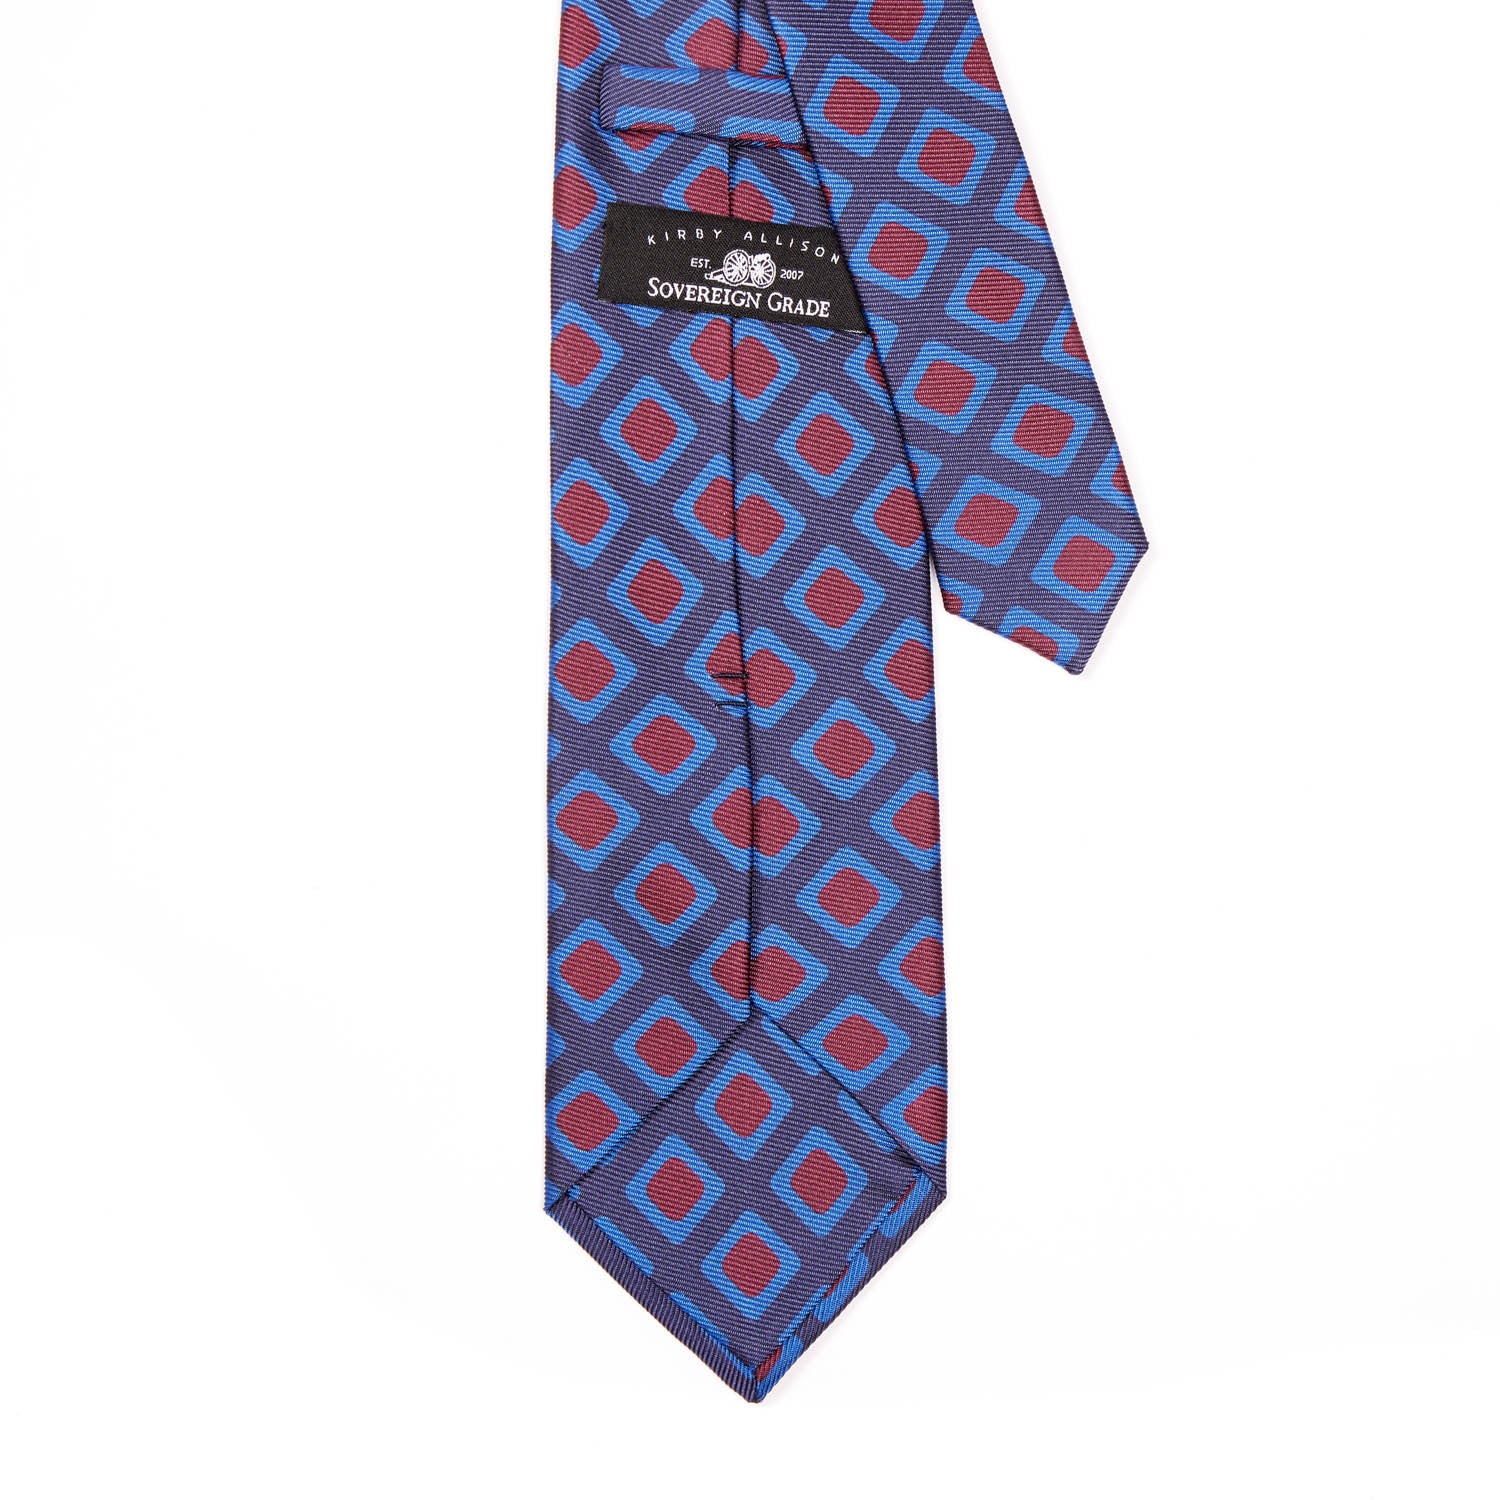 A high-quality handmade Sovereign Grade Navy 50 oz Art Deco Tie, 150 cm with a geometric pattern from the United Kingdom by KirbyAllison.com.